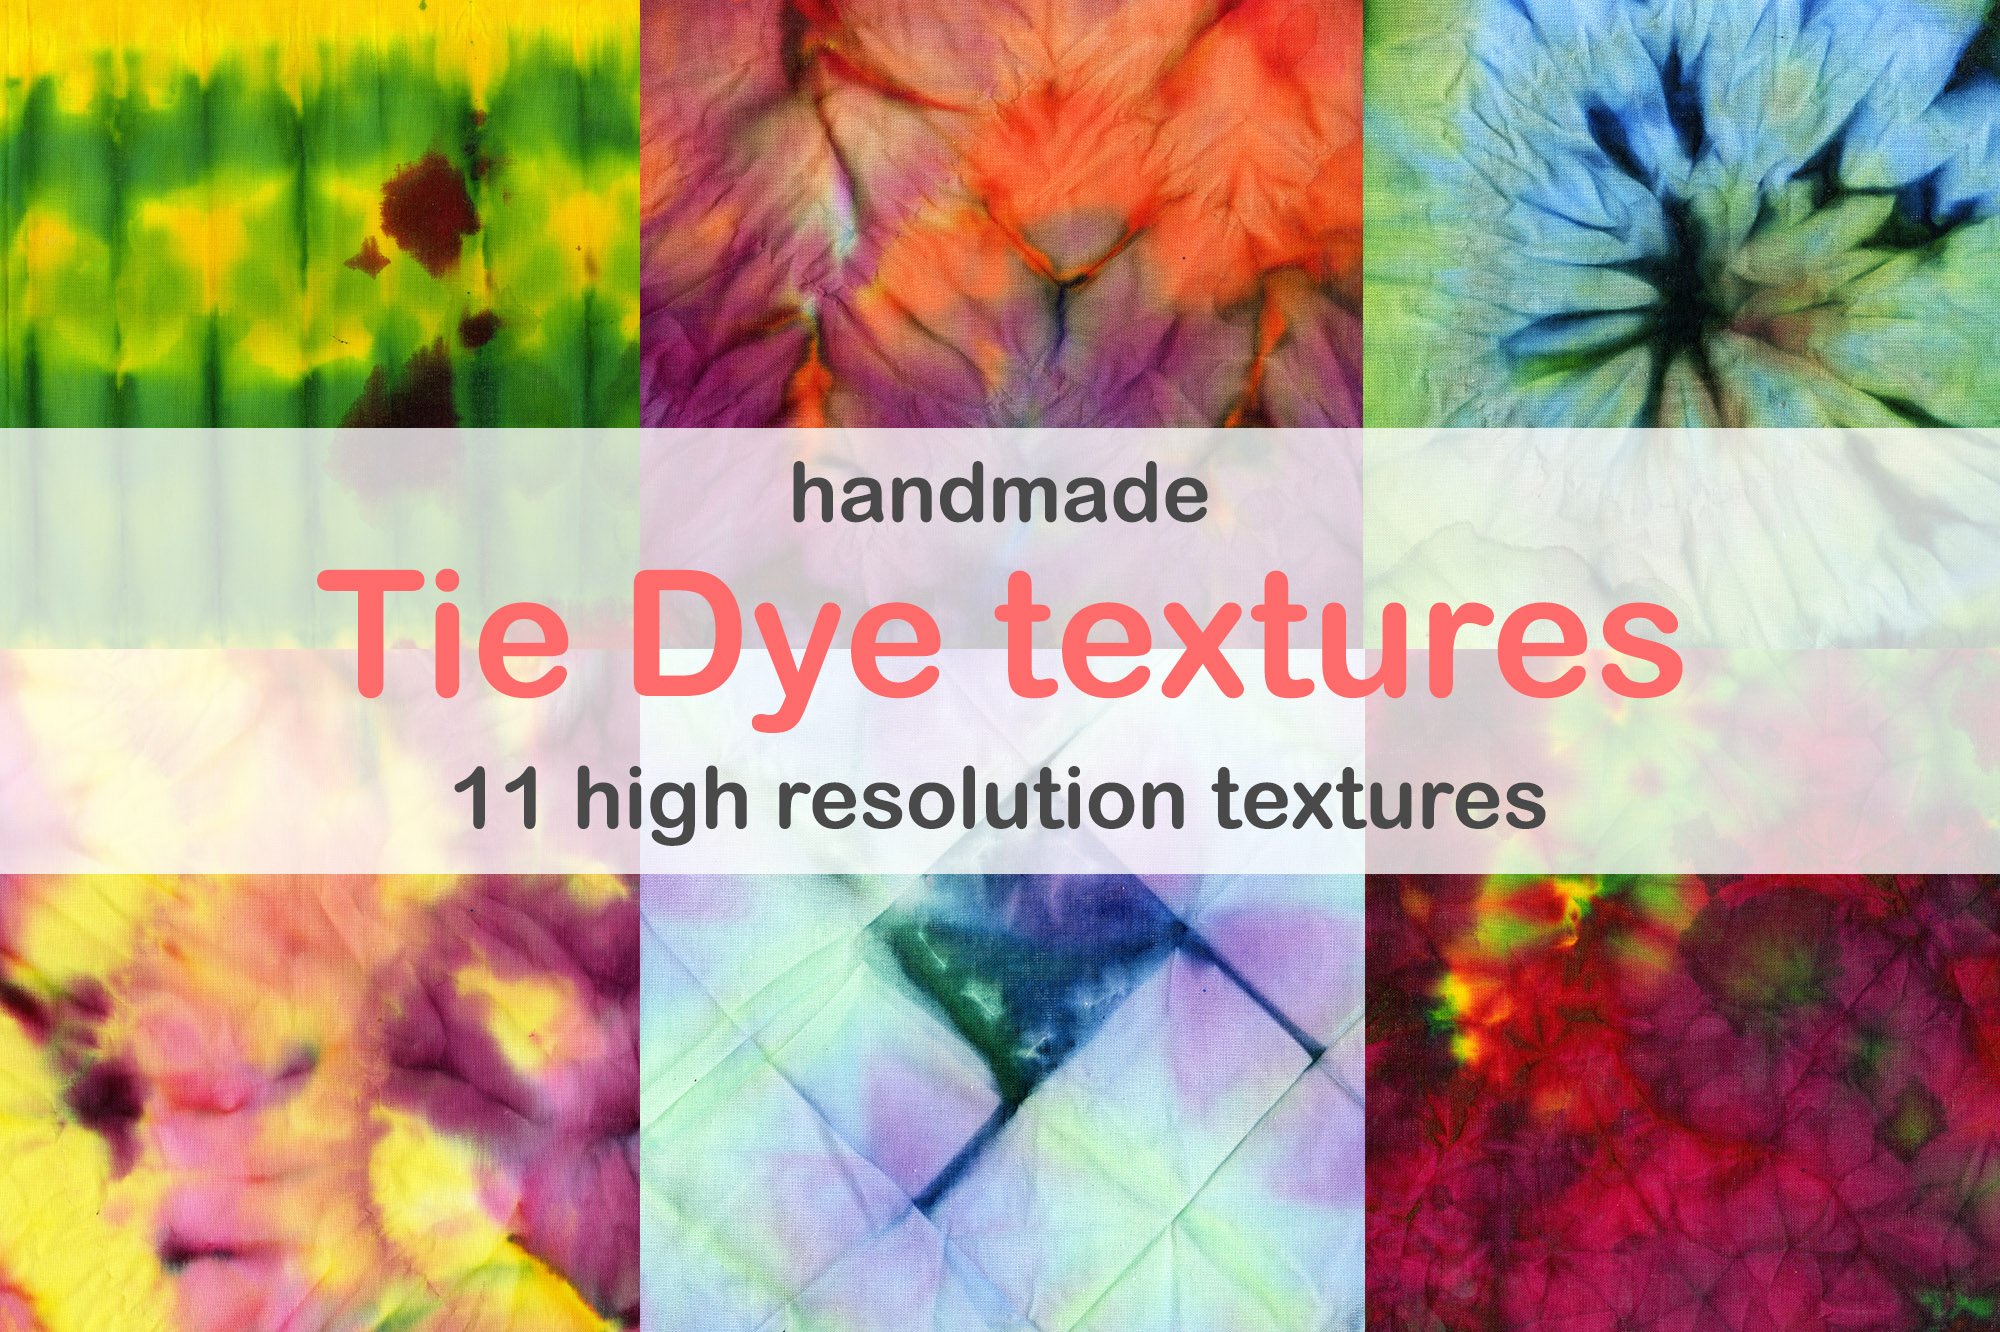 Tie Dye textures cover image.